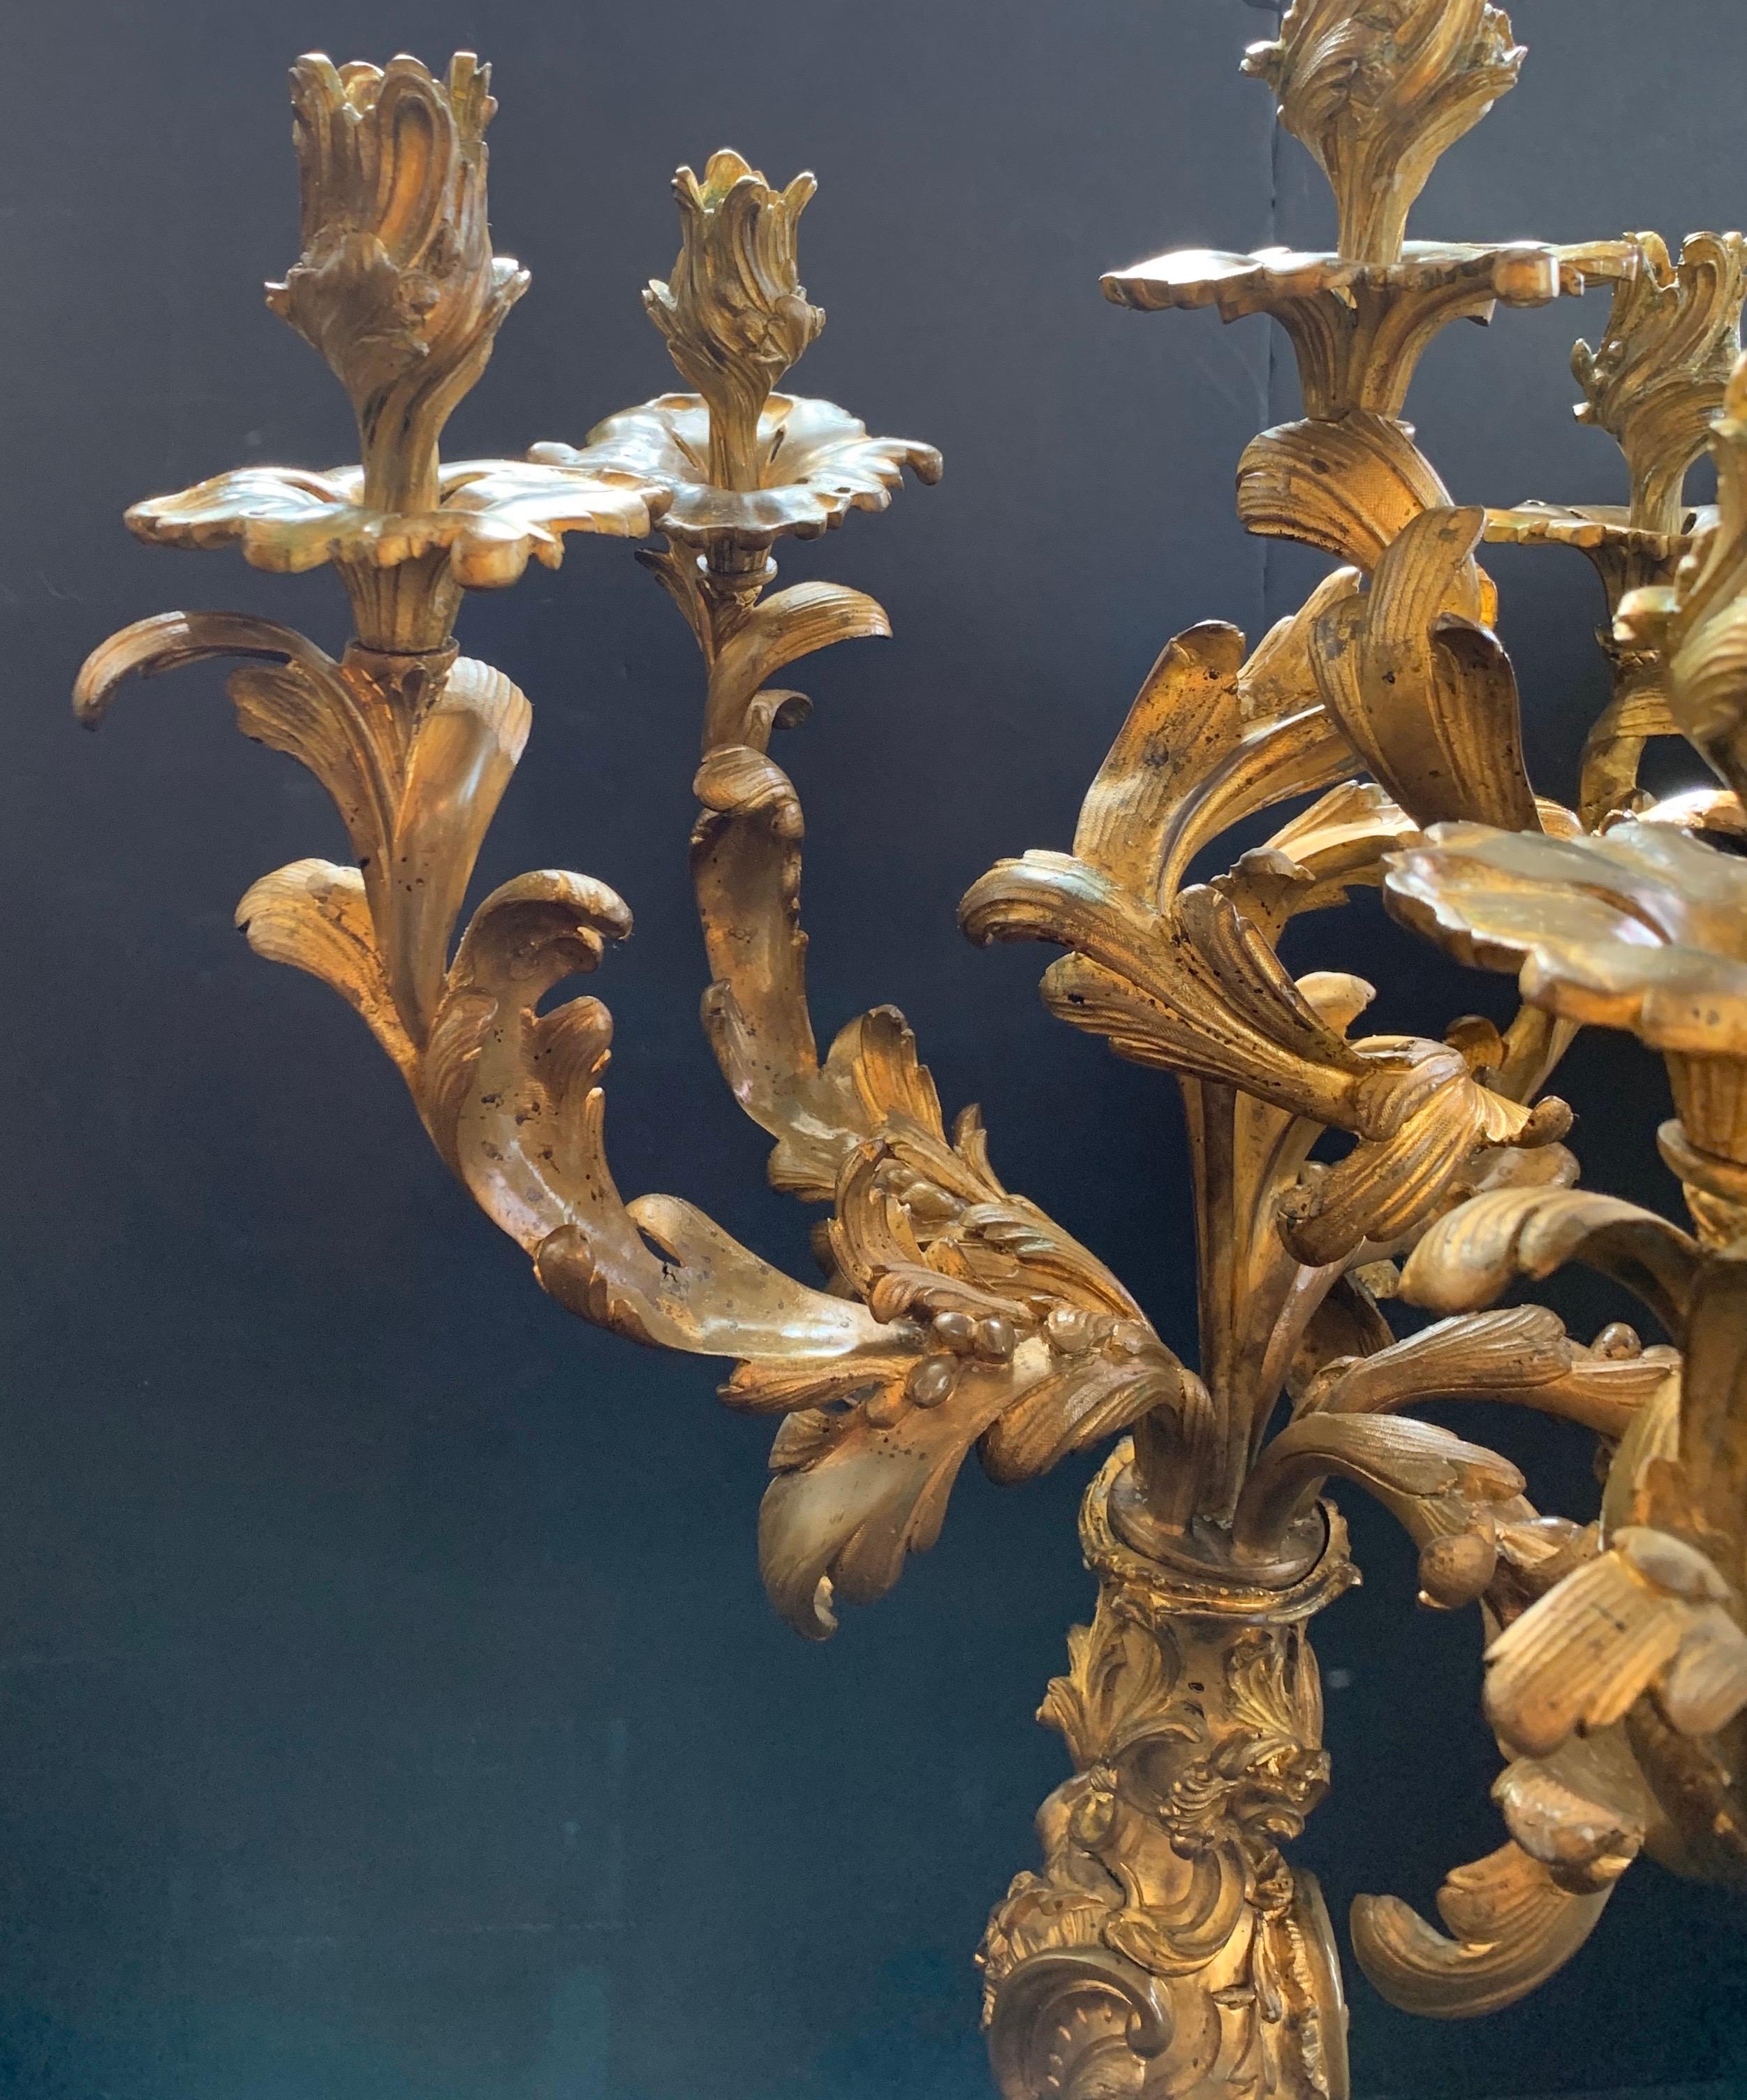 19th Century Monumental Rococo Doré Bronze Six-Arm Scrolling Acanthus Leaves Candelabras Pair